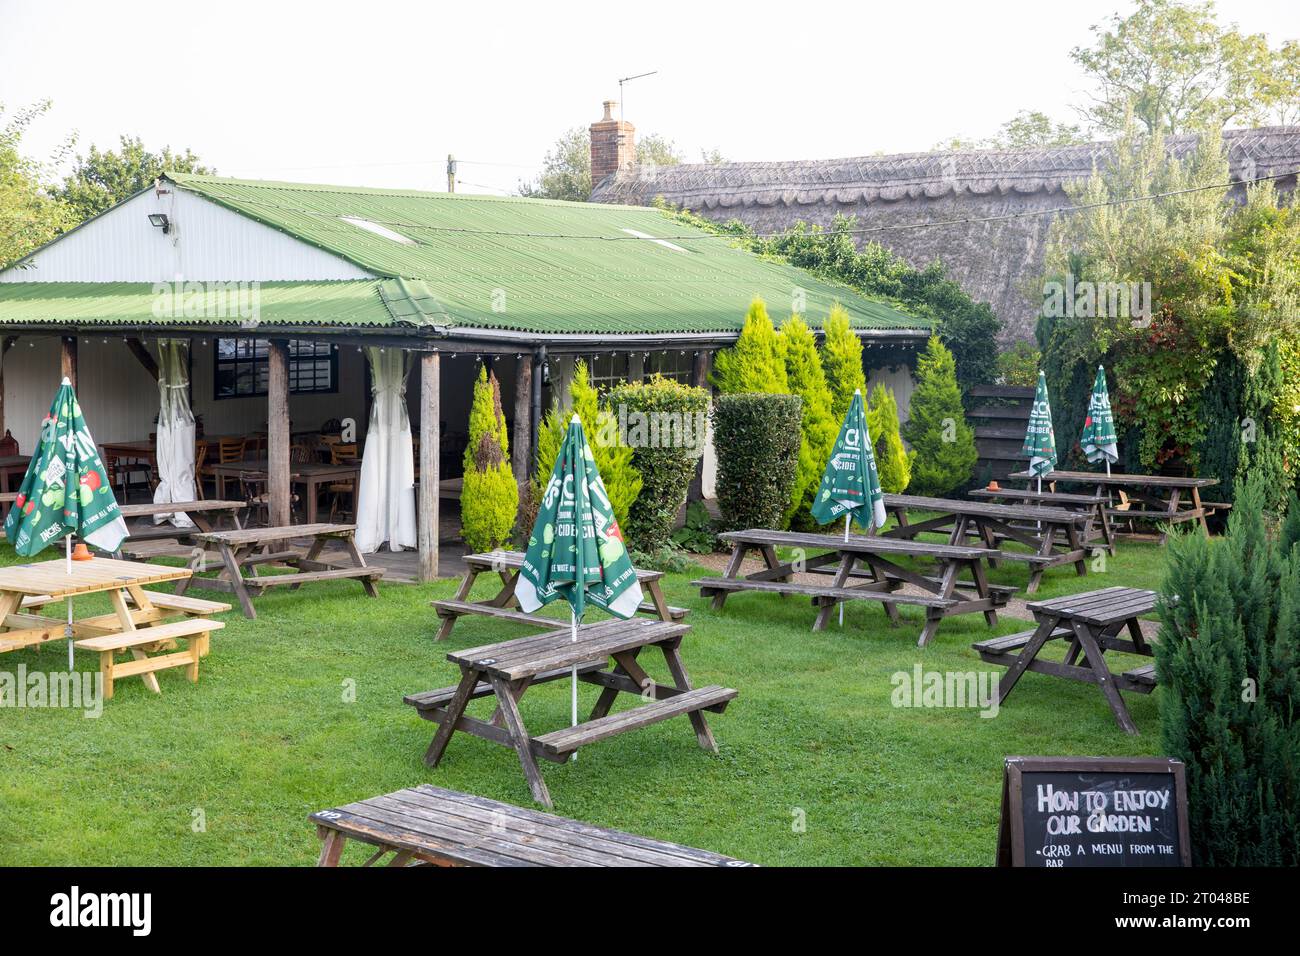 The Trusty Servant Inn in Minstead Lyndhurst is a public house serving food and providing accommodation, the beer and food garden shown,England,UK Stock Photo